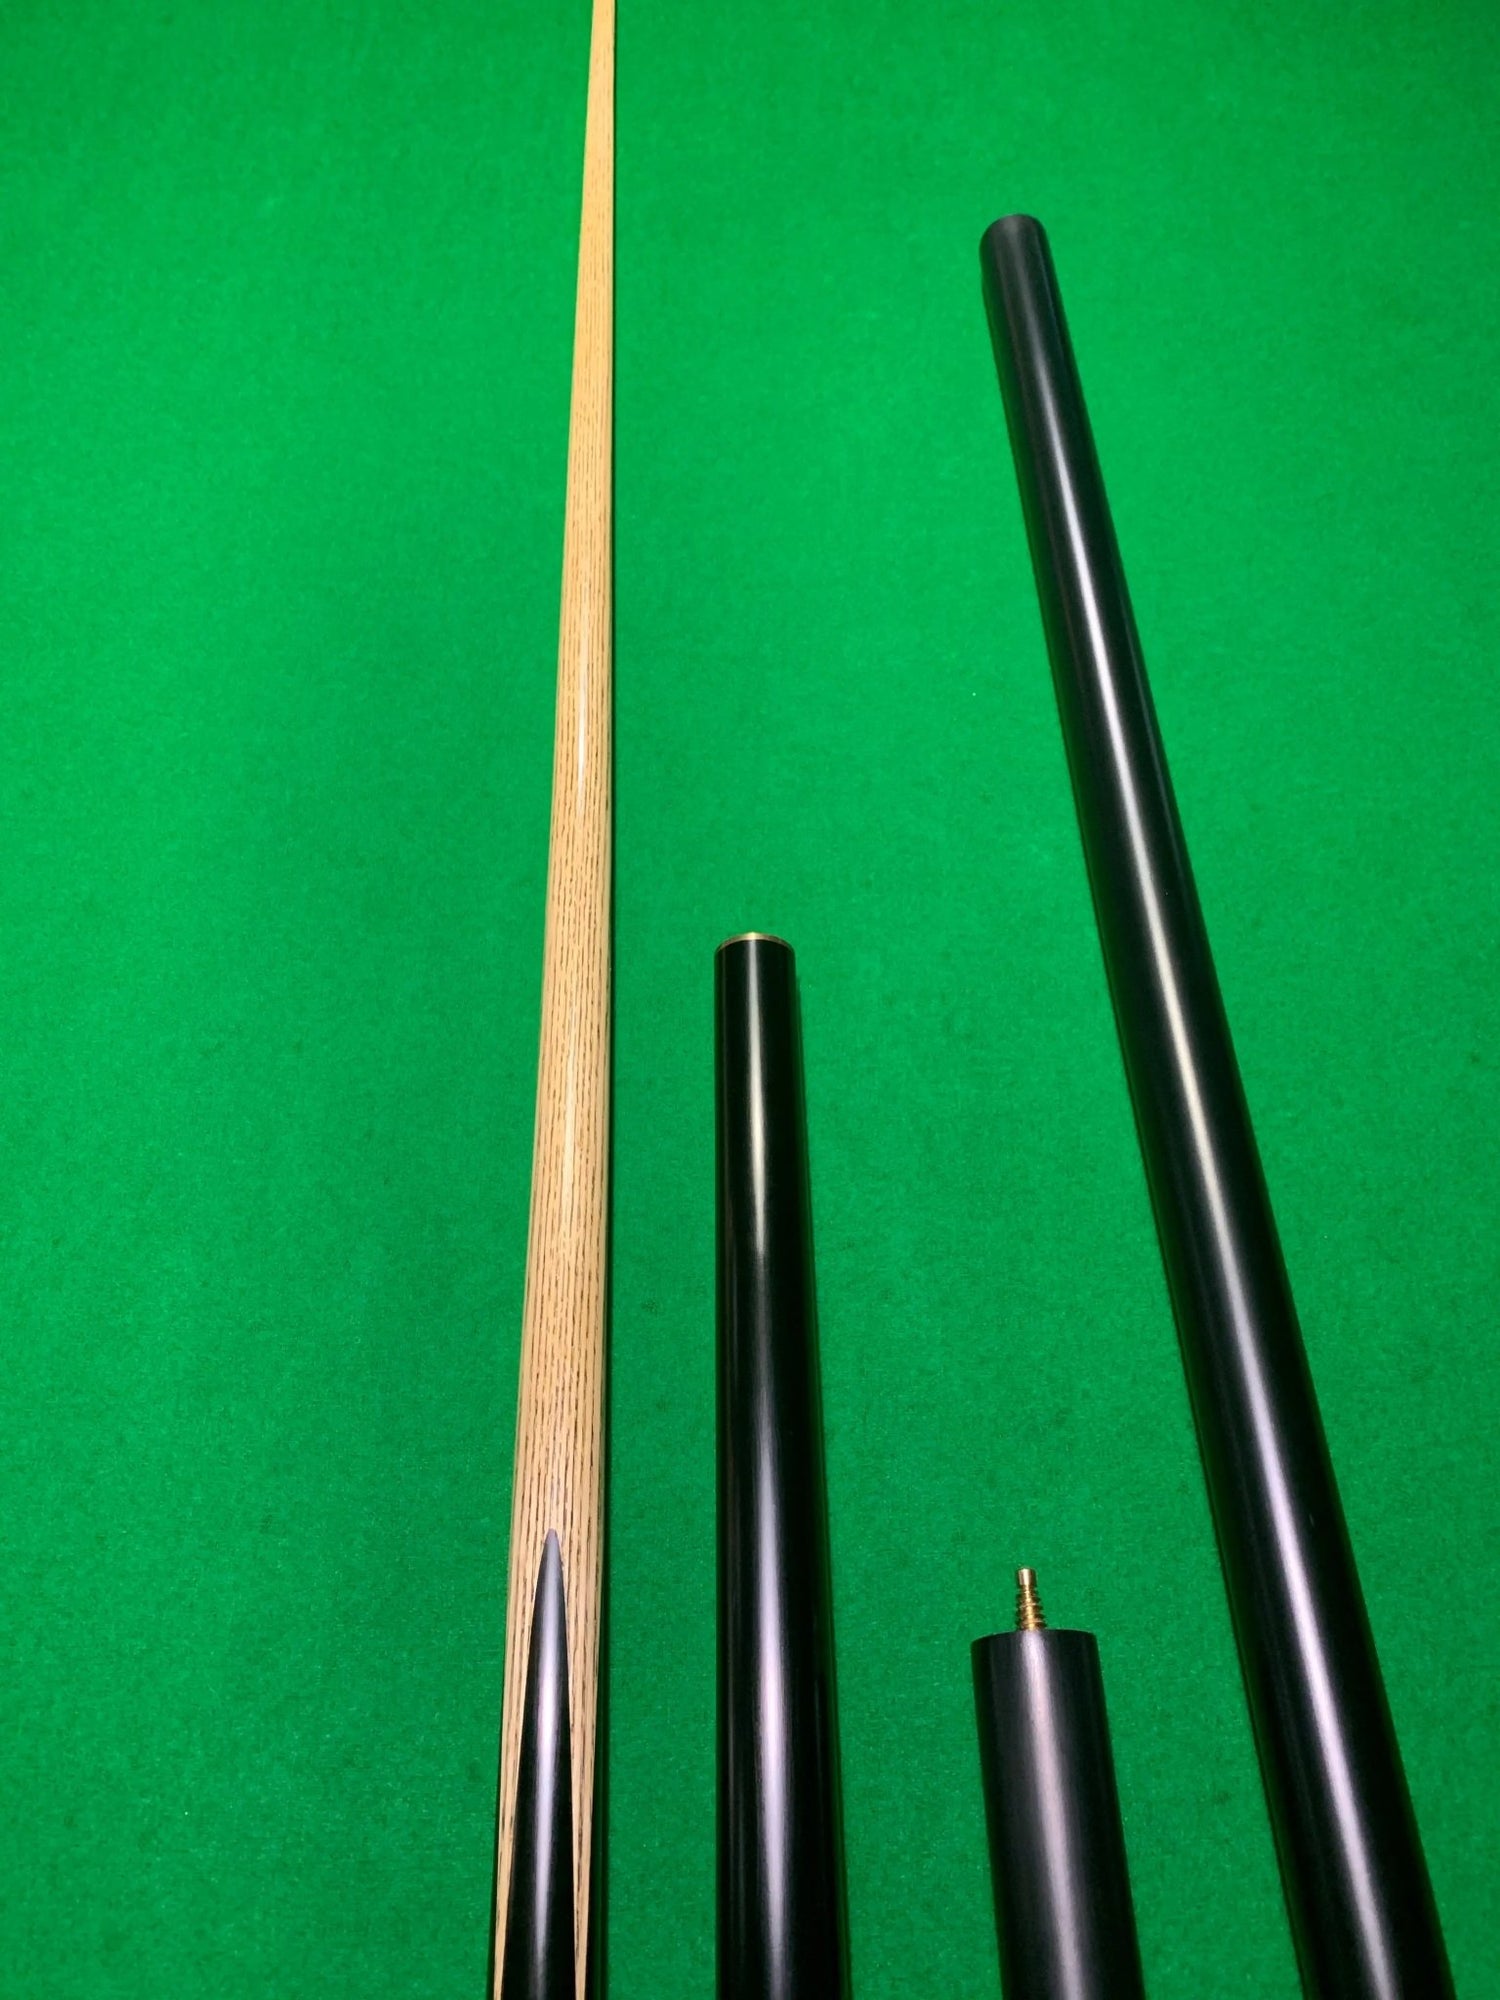 POWERGLIDE Heritage Purist Hand Made 3/4 Pool, Snooker & Billiard Ash Cue with Butt Extension - Q-Masters